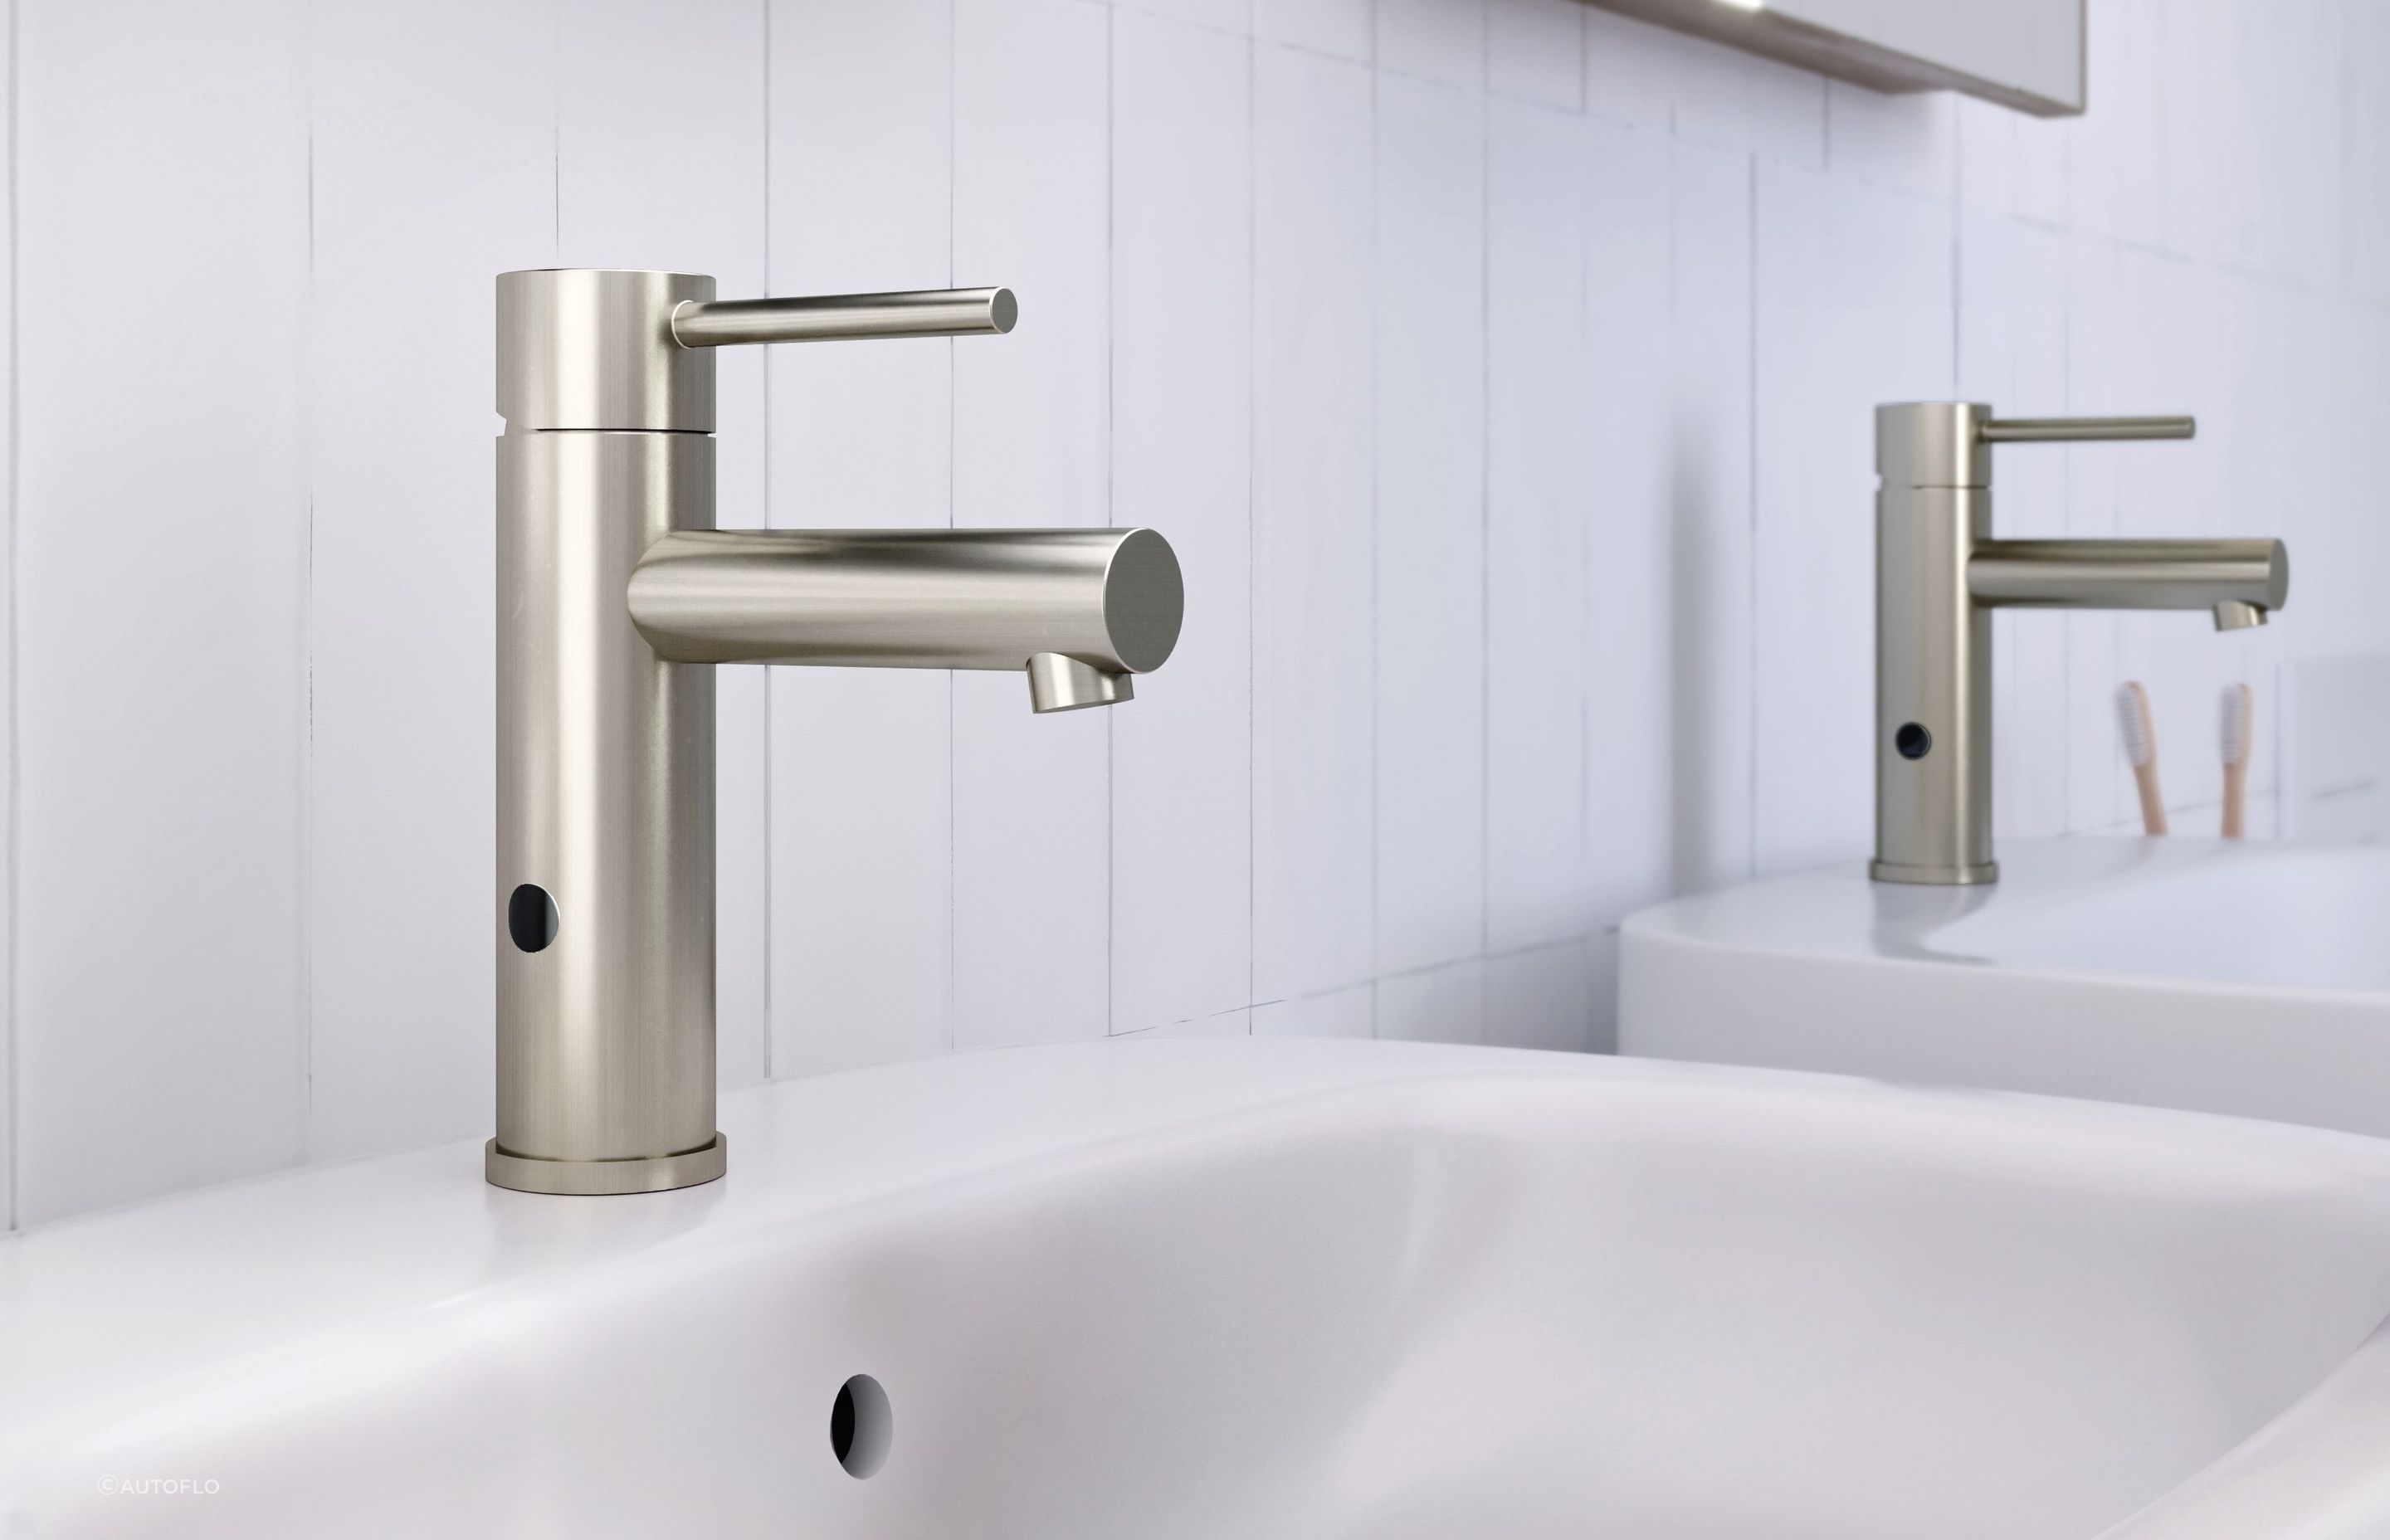 The innovative and dazzling Mizu Drift Dual Function Sensor Basin Mixer that works at the wave of a hand